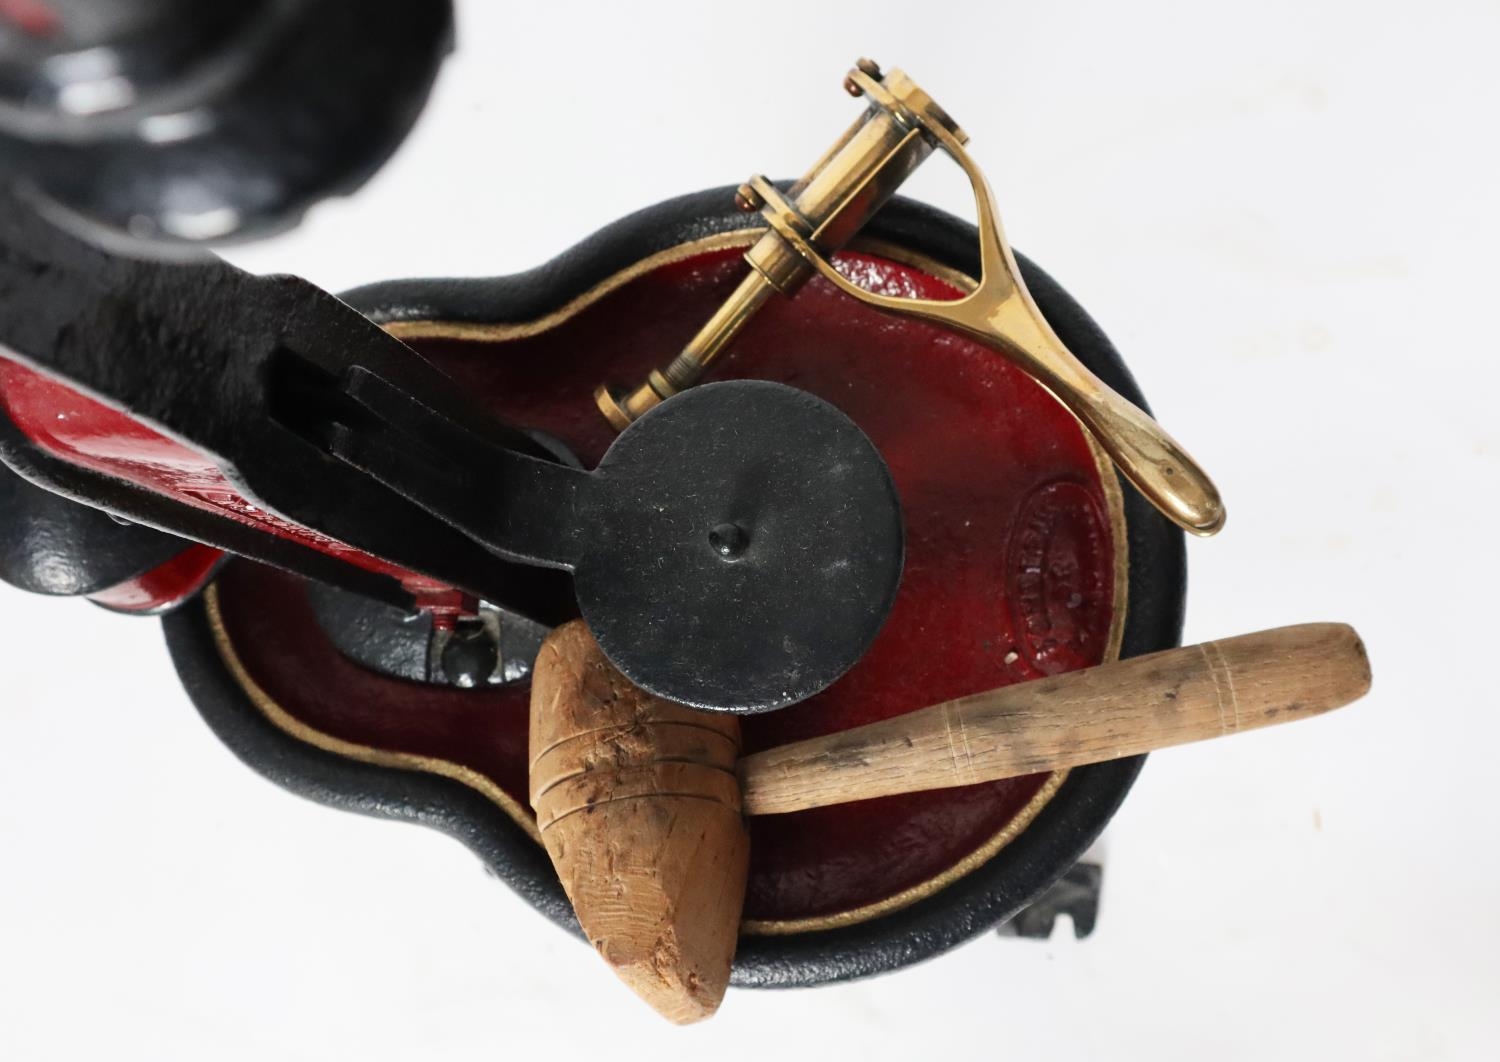 ‘CHARLES PINEL, FONDERIE DE MAROMME’ FRENCH VINTAGE MAROON AND BLACK PAINTED HAND OPERATED CAST IRON - Image 2 of 4